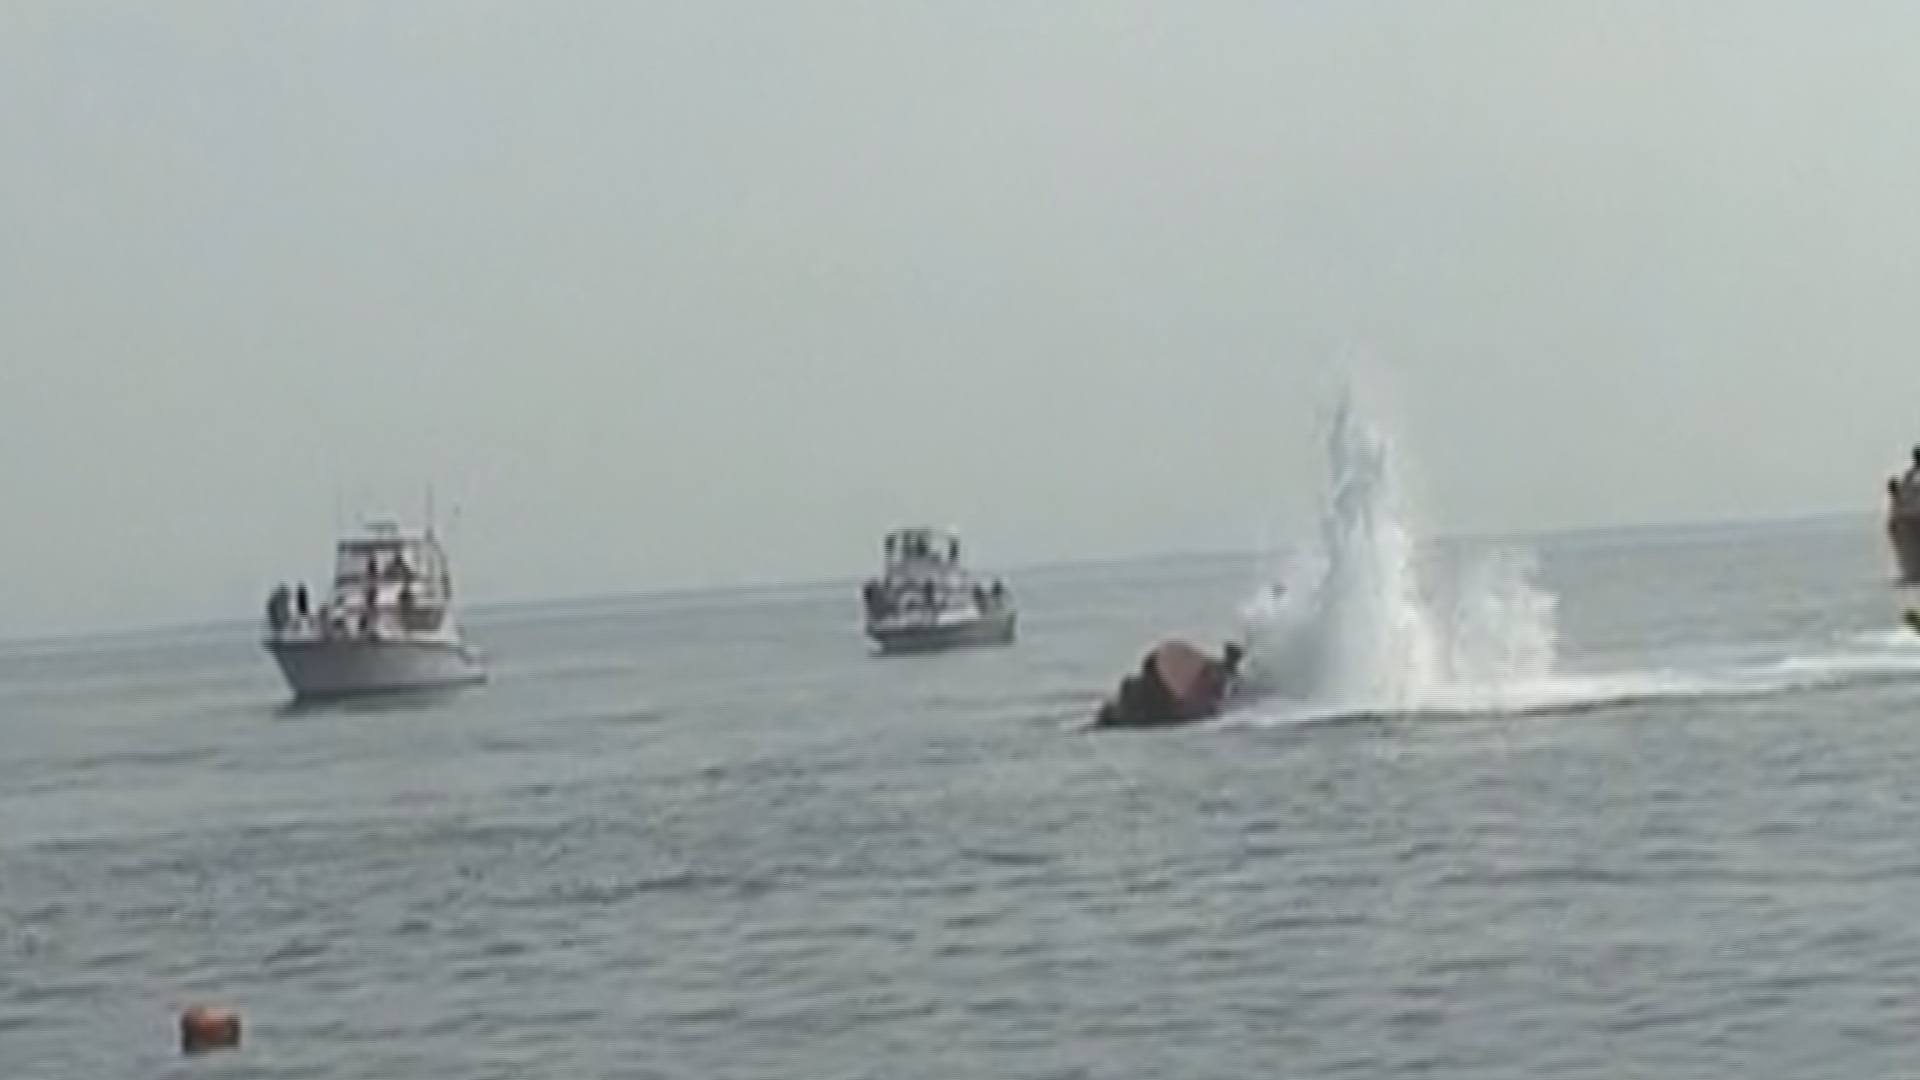 Sinking of the Red Sea Tug